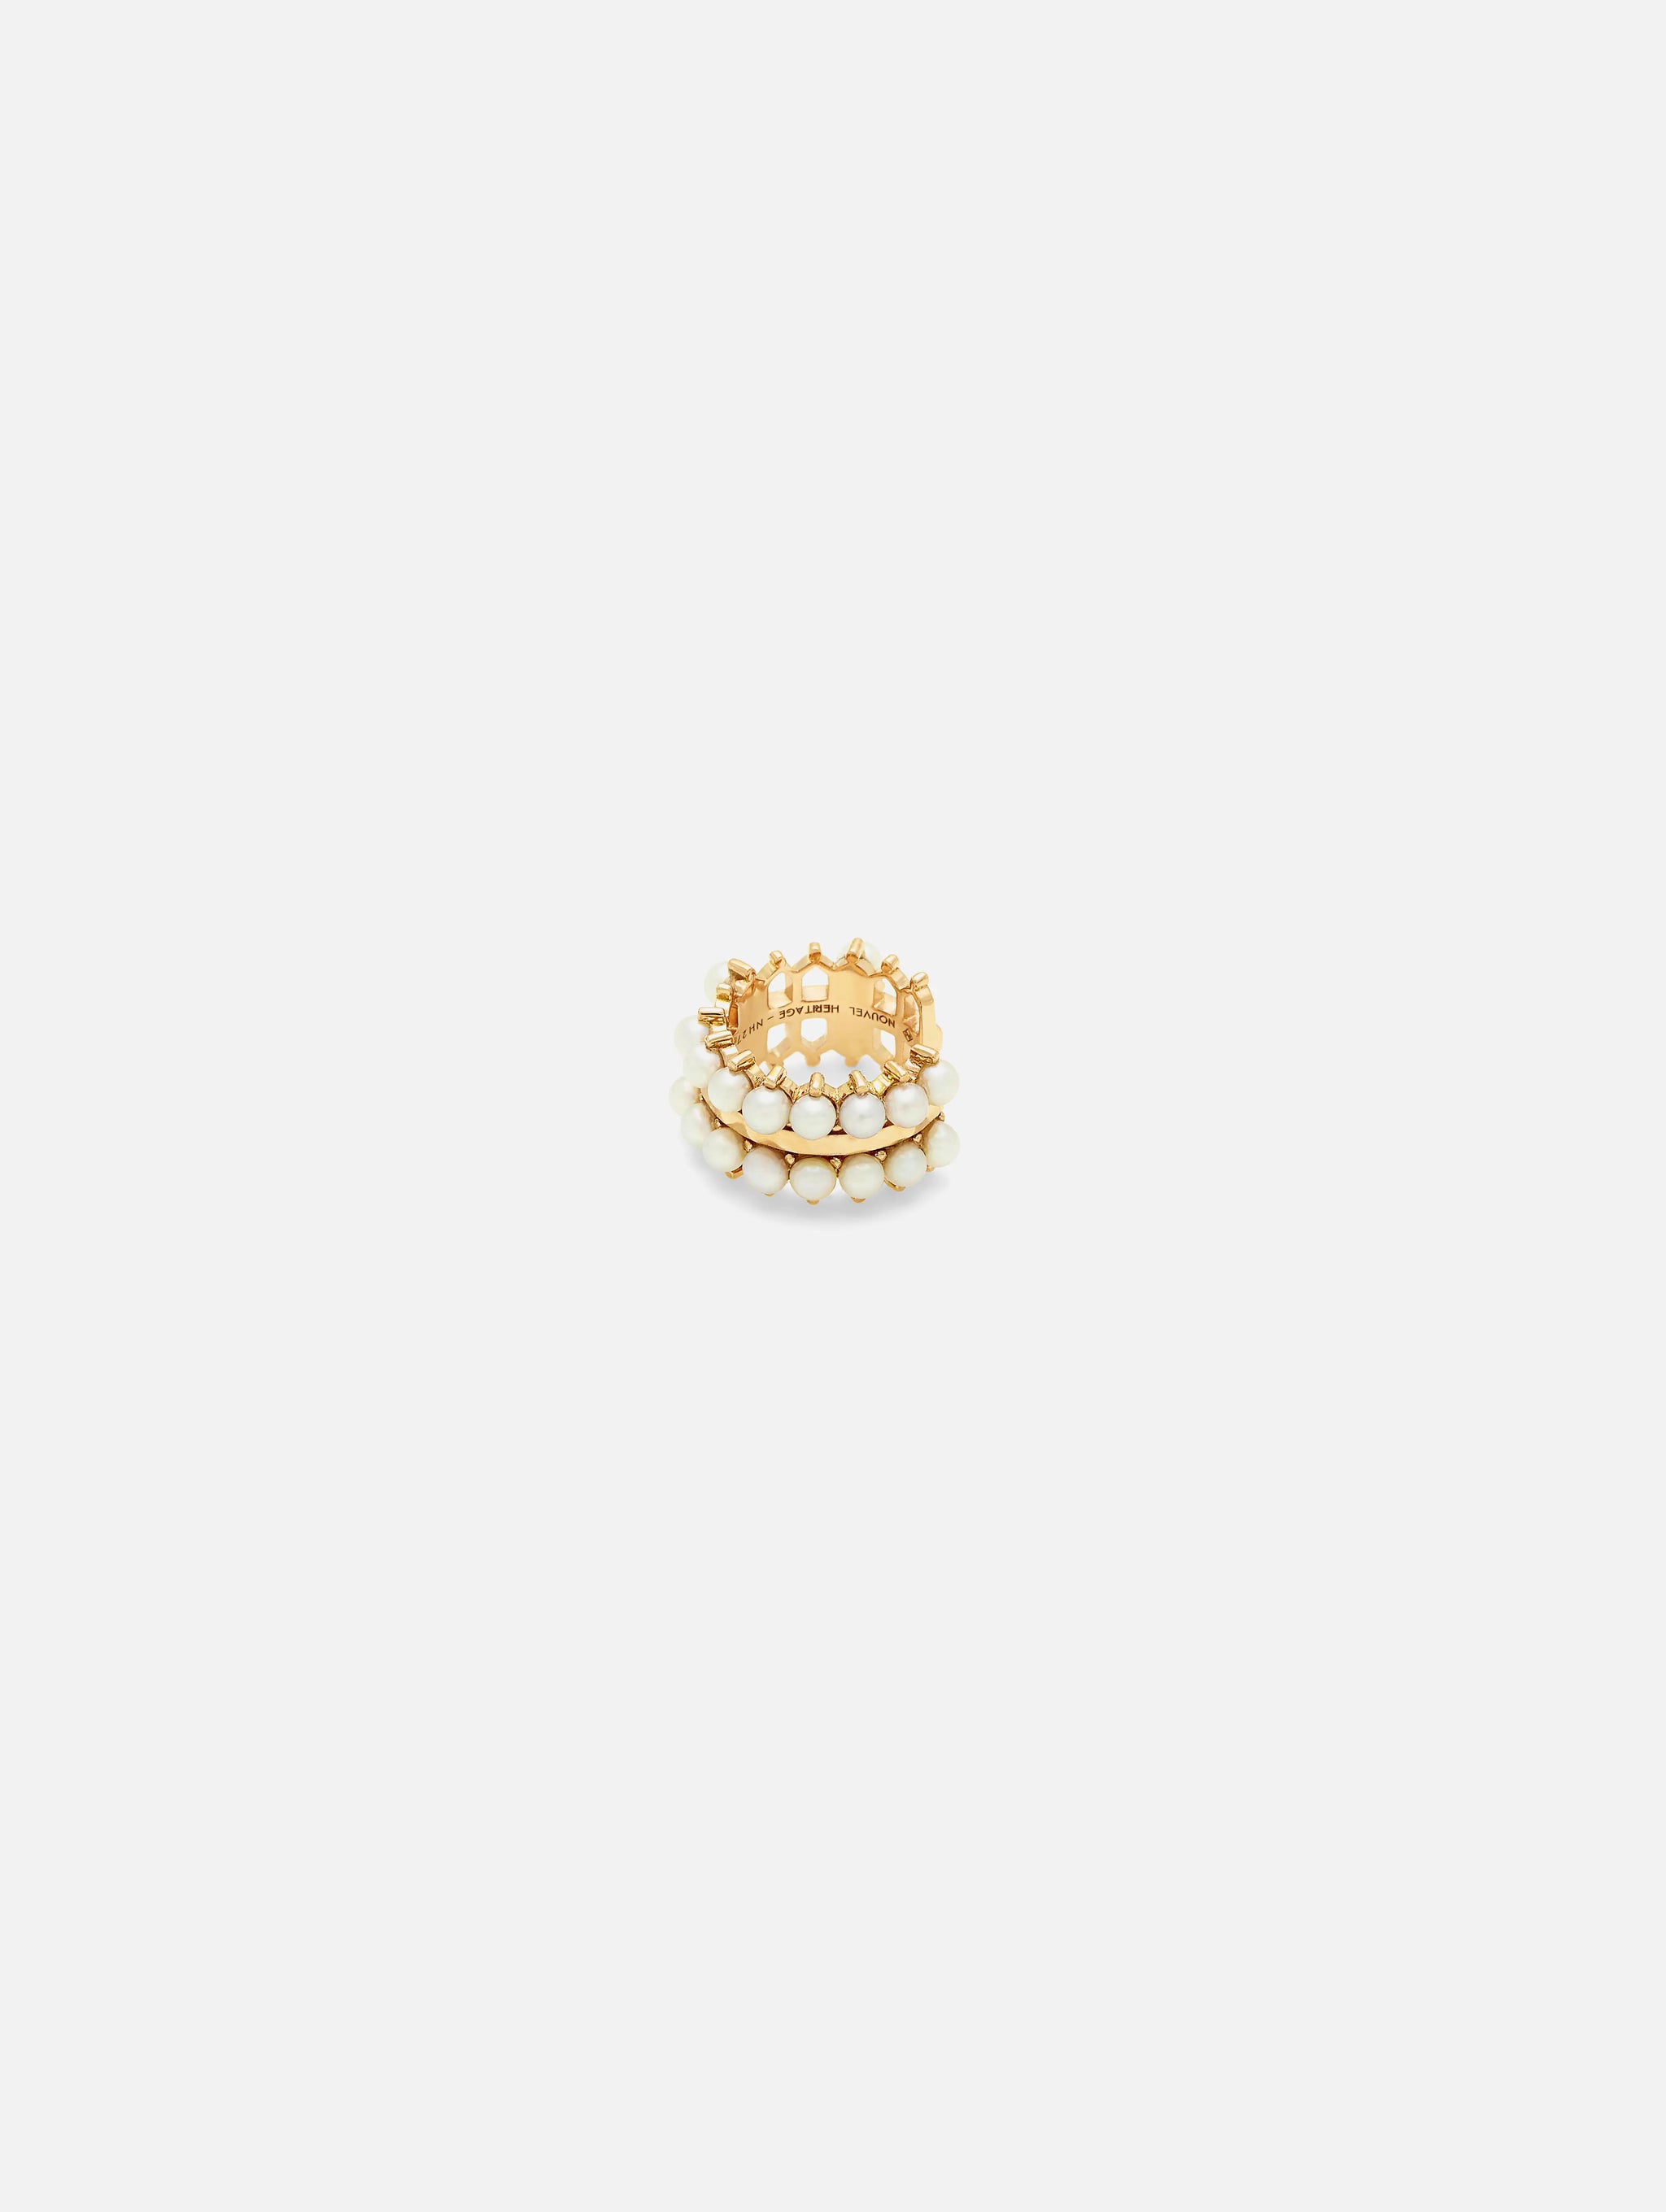 Double Pearl Ear Cuff in Yellow Gold - 1 - Nouvel Heritage